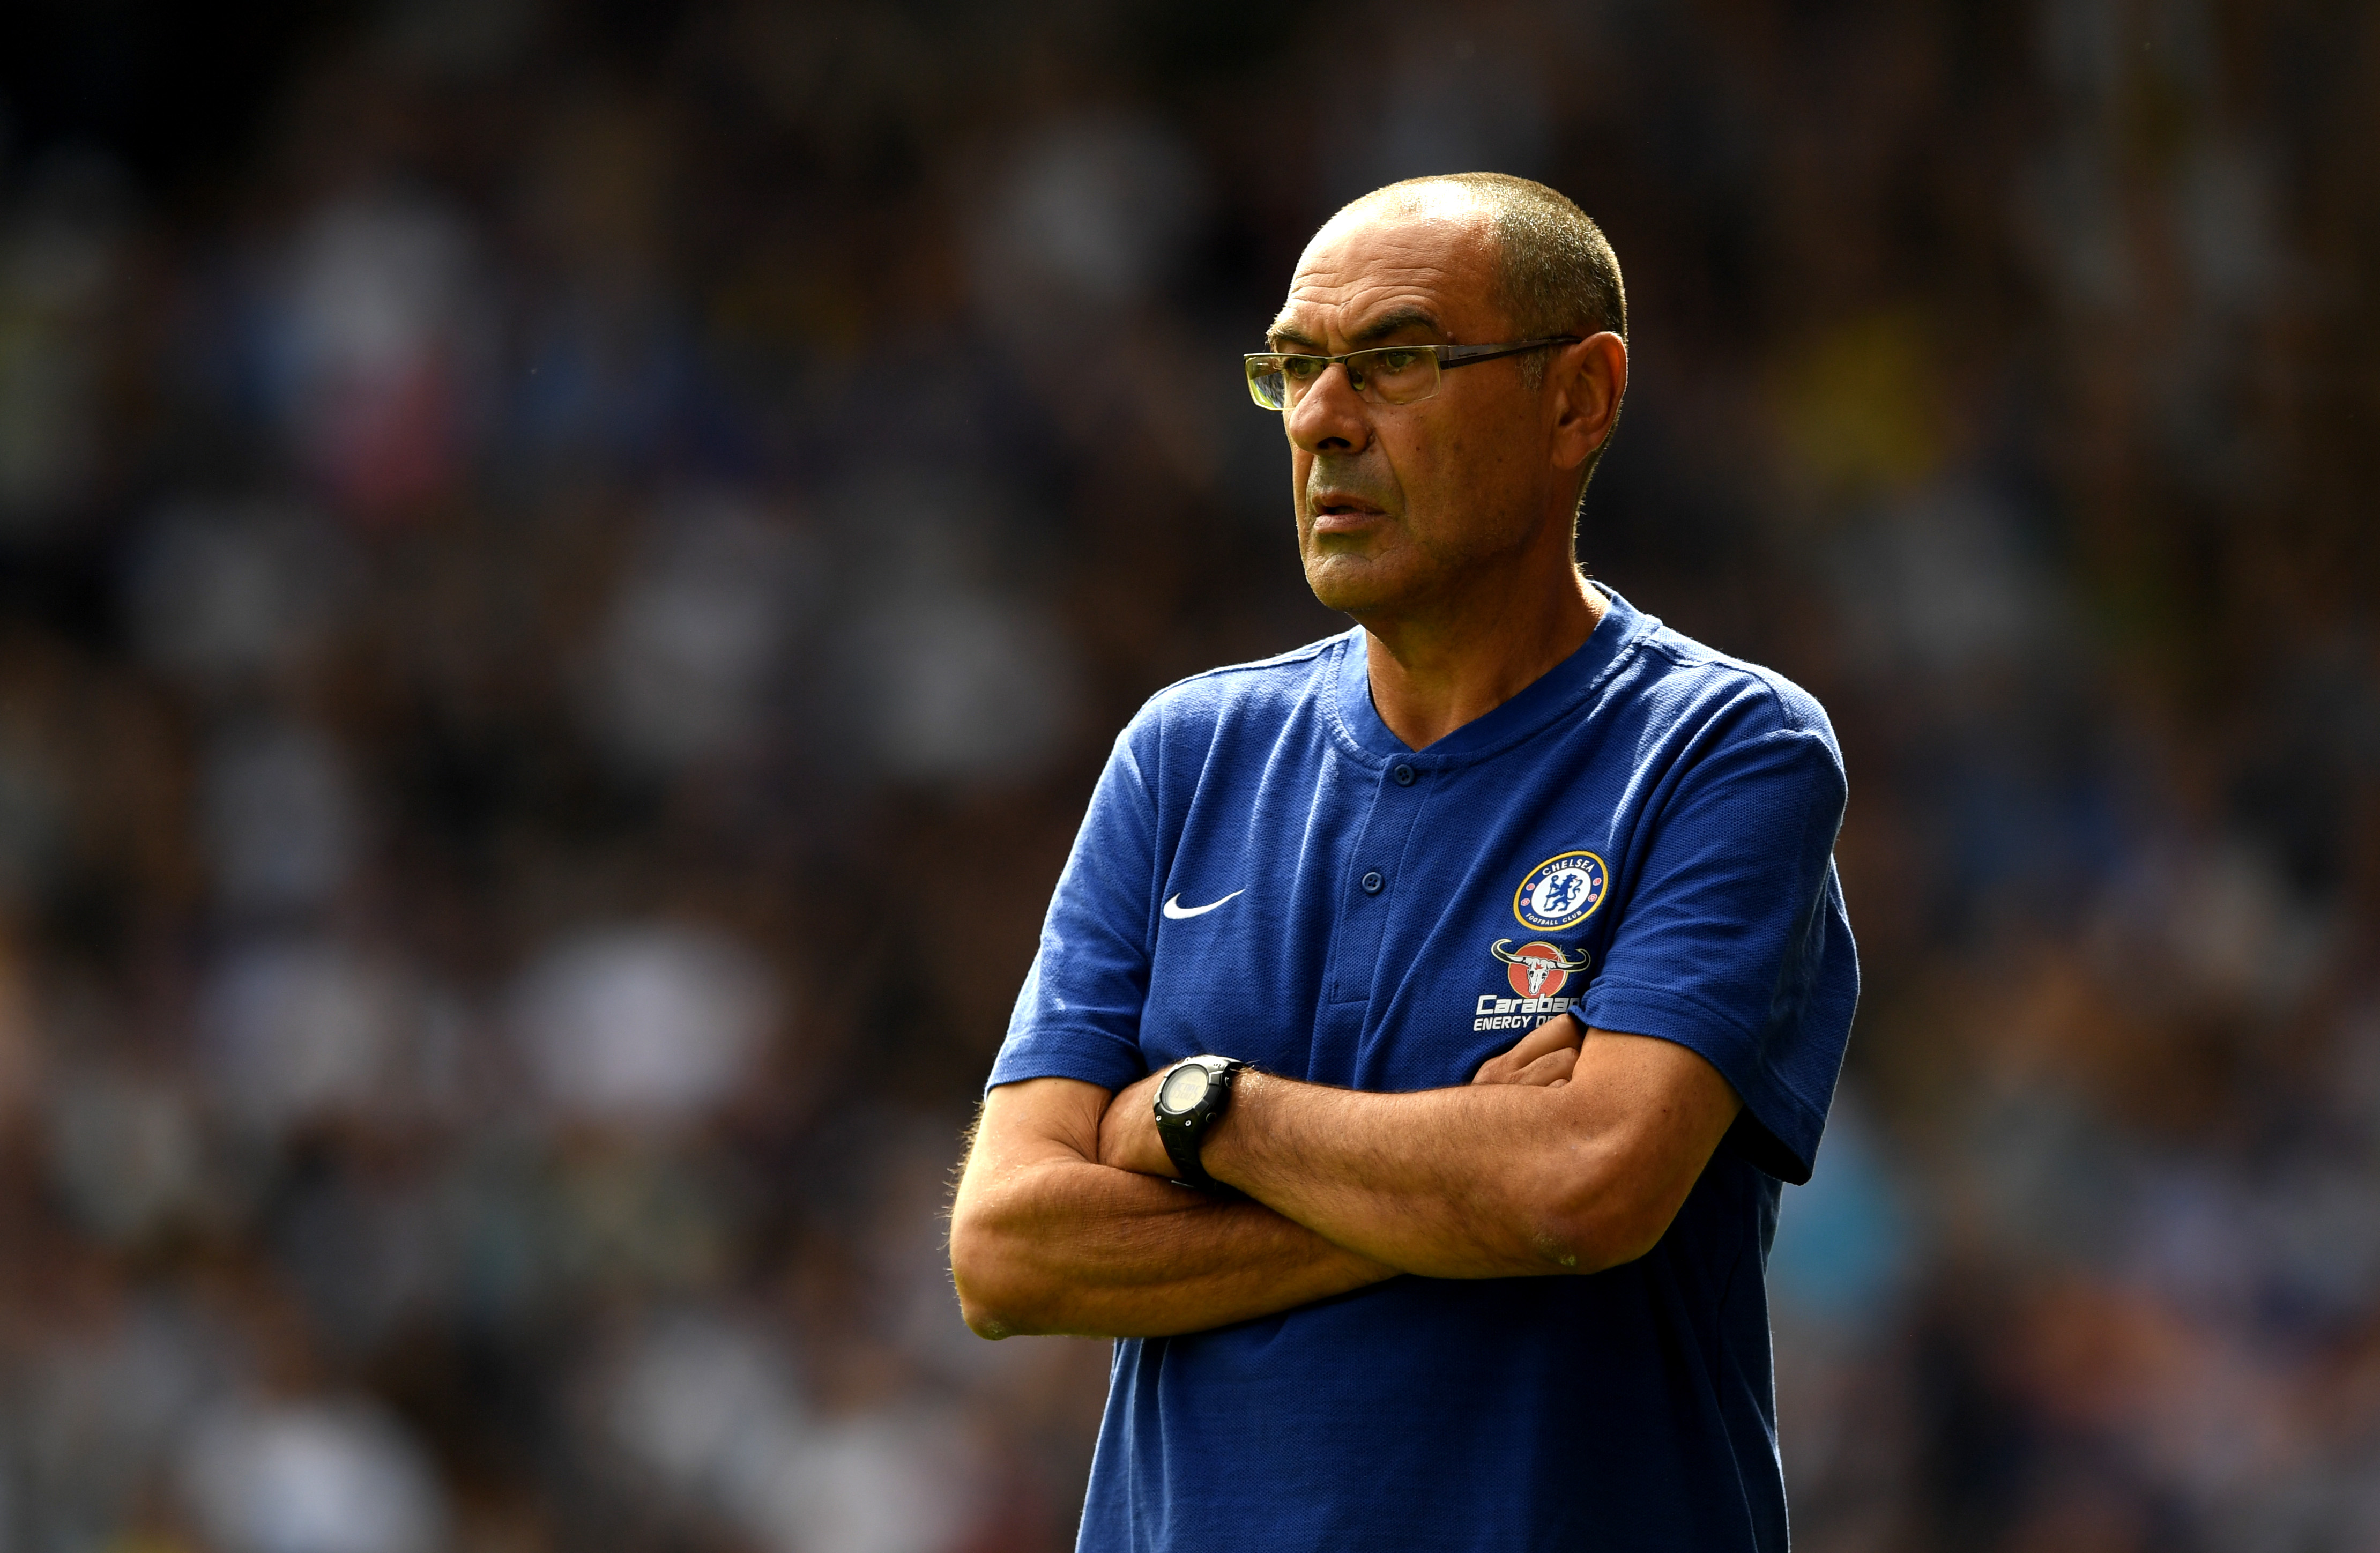 HUDDERSFIELD, ENGLAND - AUGUST 11:  Maurizio Sarri, Manager of Chelsea looks on during the Premier League match between Huddersfield Town and Chelsea FC at John Smith's Stadium on August 11, 2018 in Huddersfield, United Kingdom.  (Photo by Shaun Botterill/Getty Images)